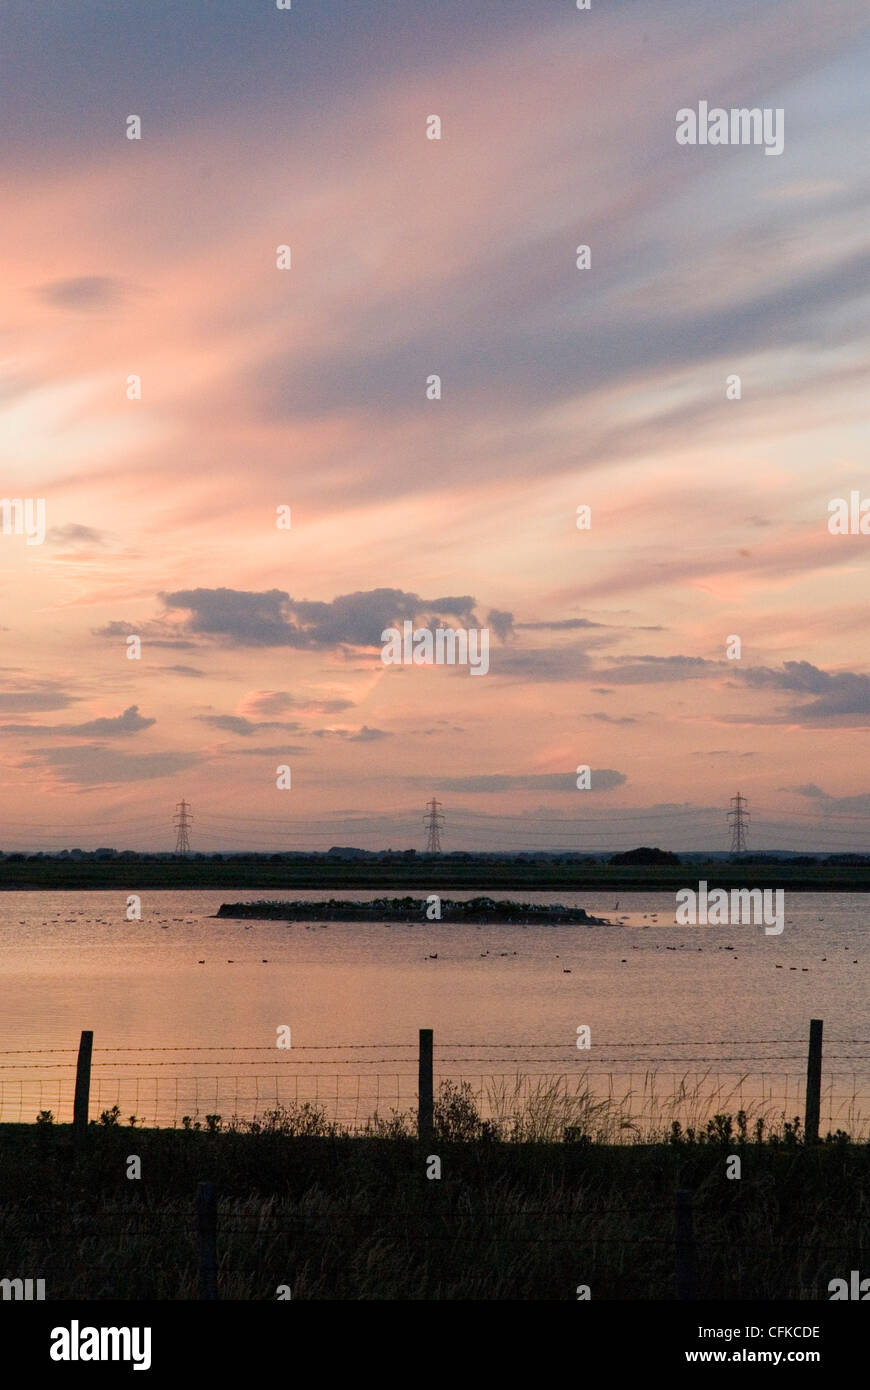 Sunset image with silhouette of fence and pylons over water. Stock Photo